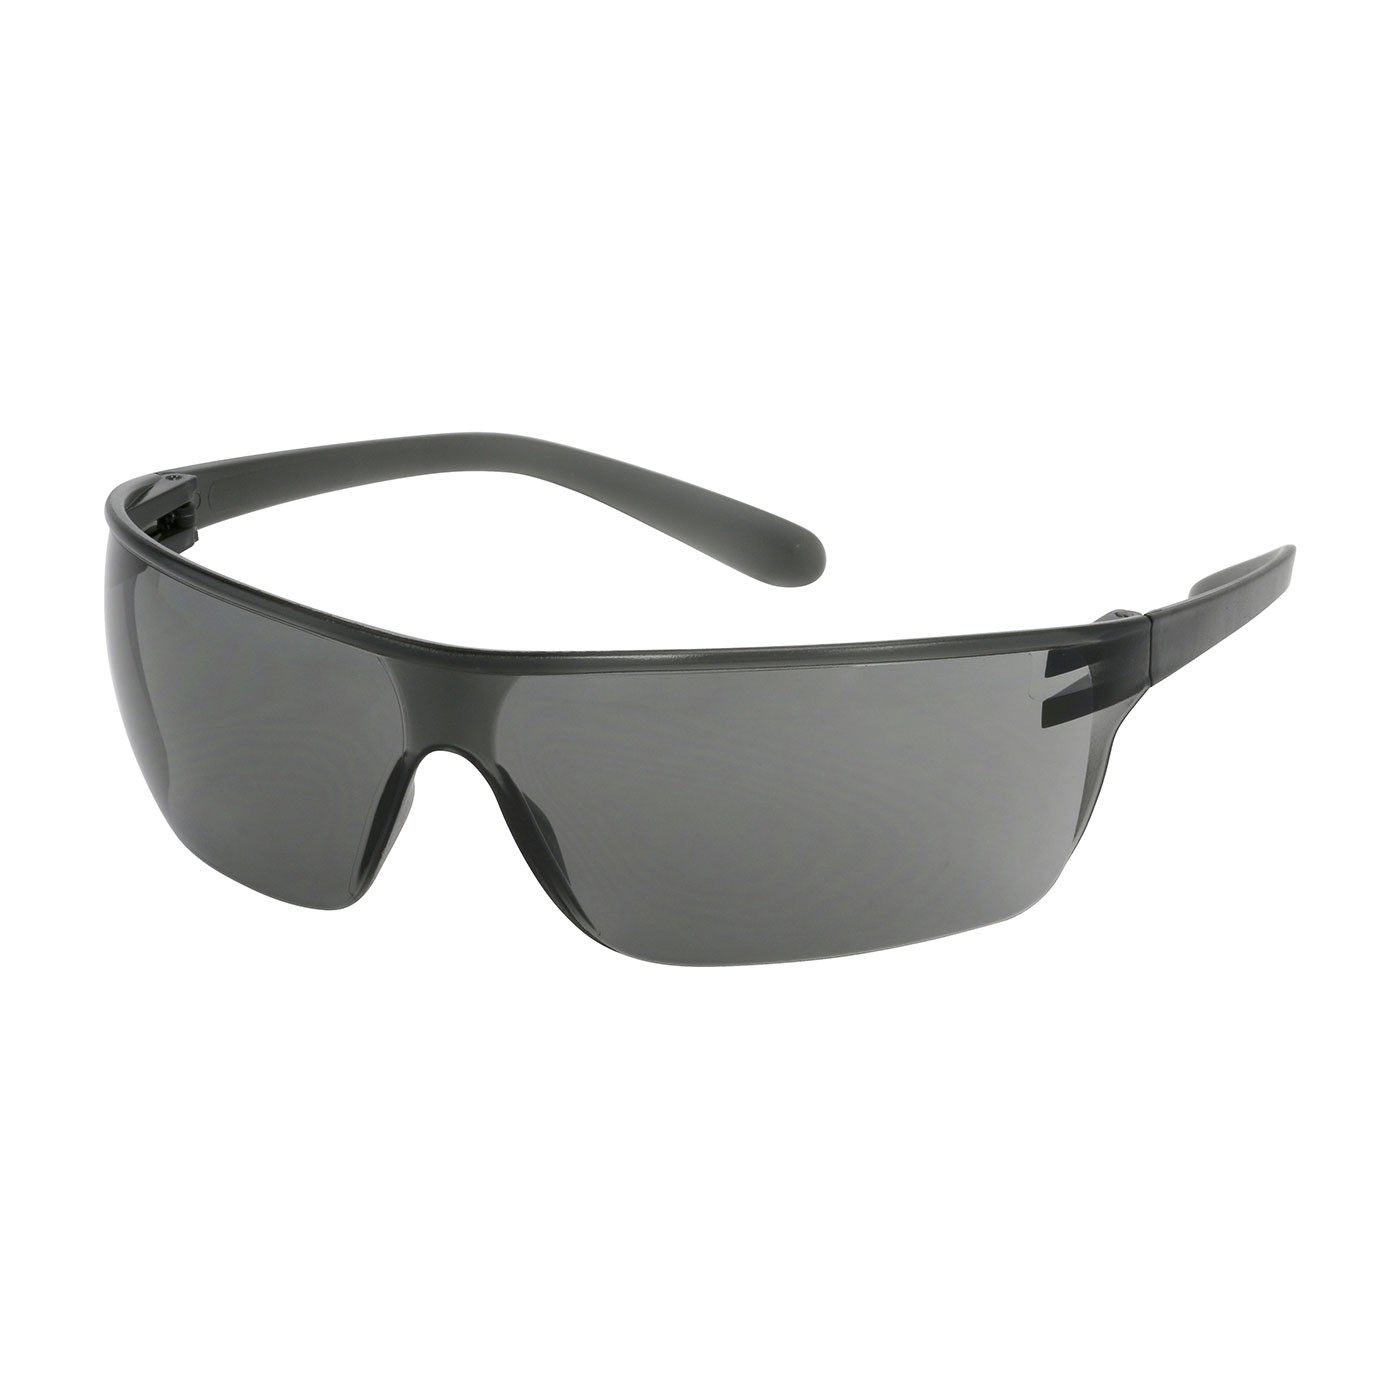 Zenon Z-Lyte II™ Rimless Safety Glasses with Gray Temple, Gray Lens and Anti-Scratch / Anti-Fog Coating  (#250-13-0021)